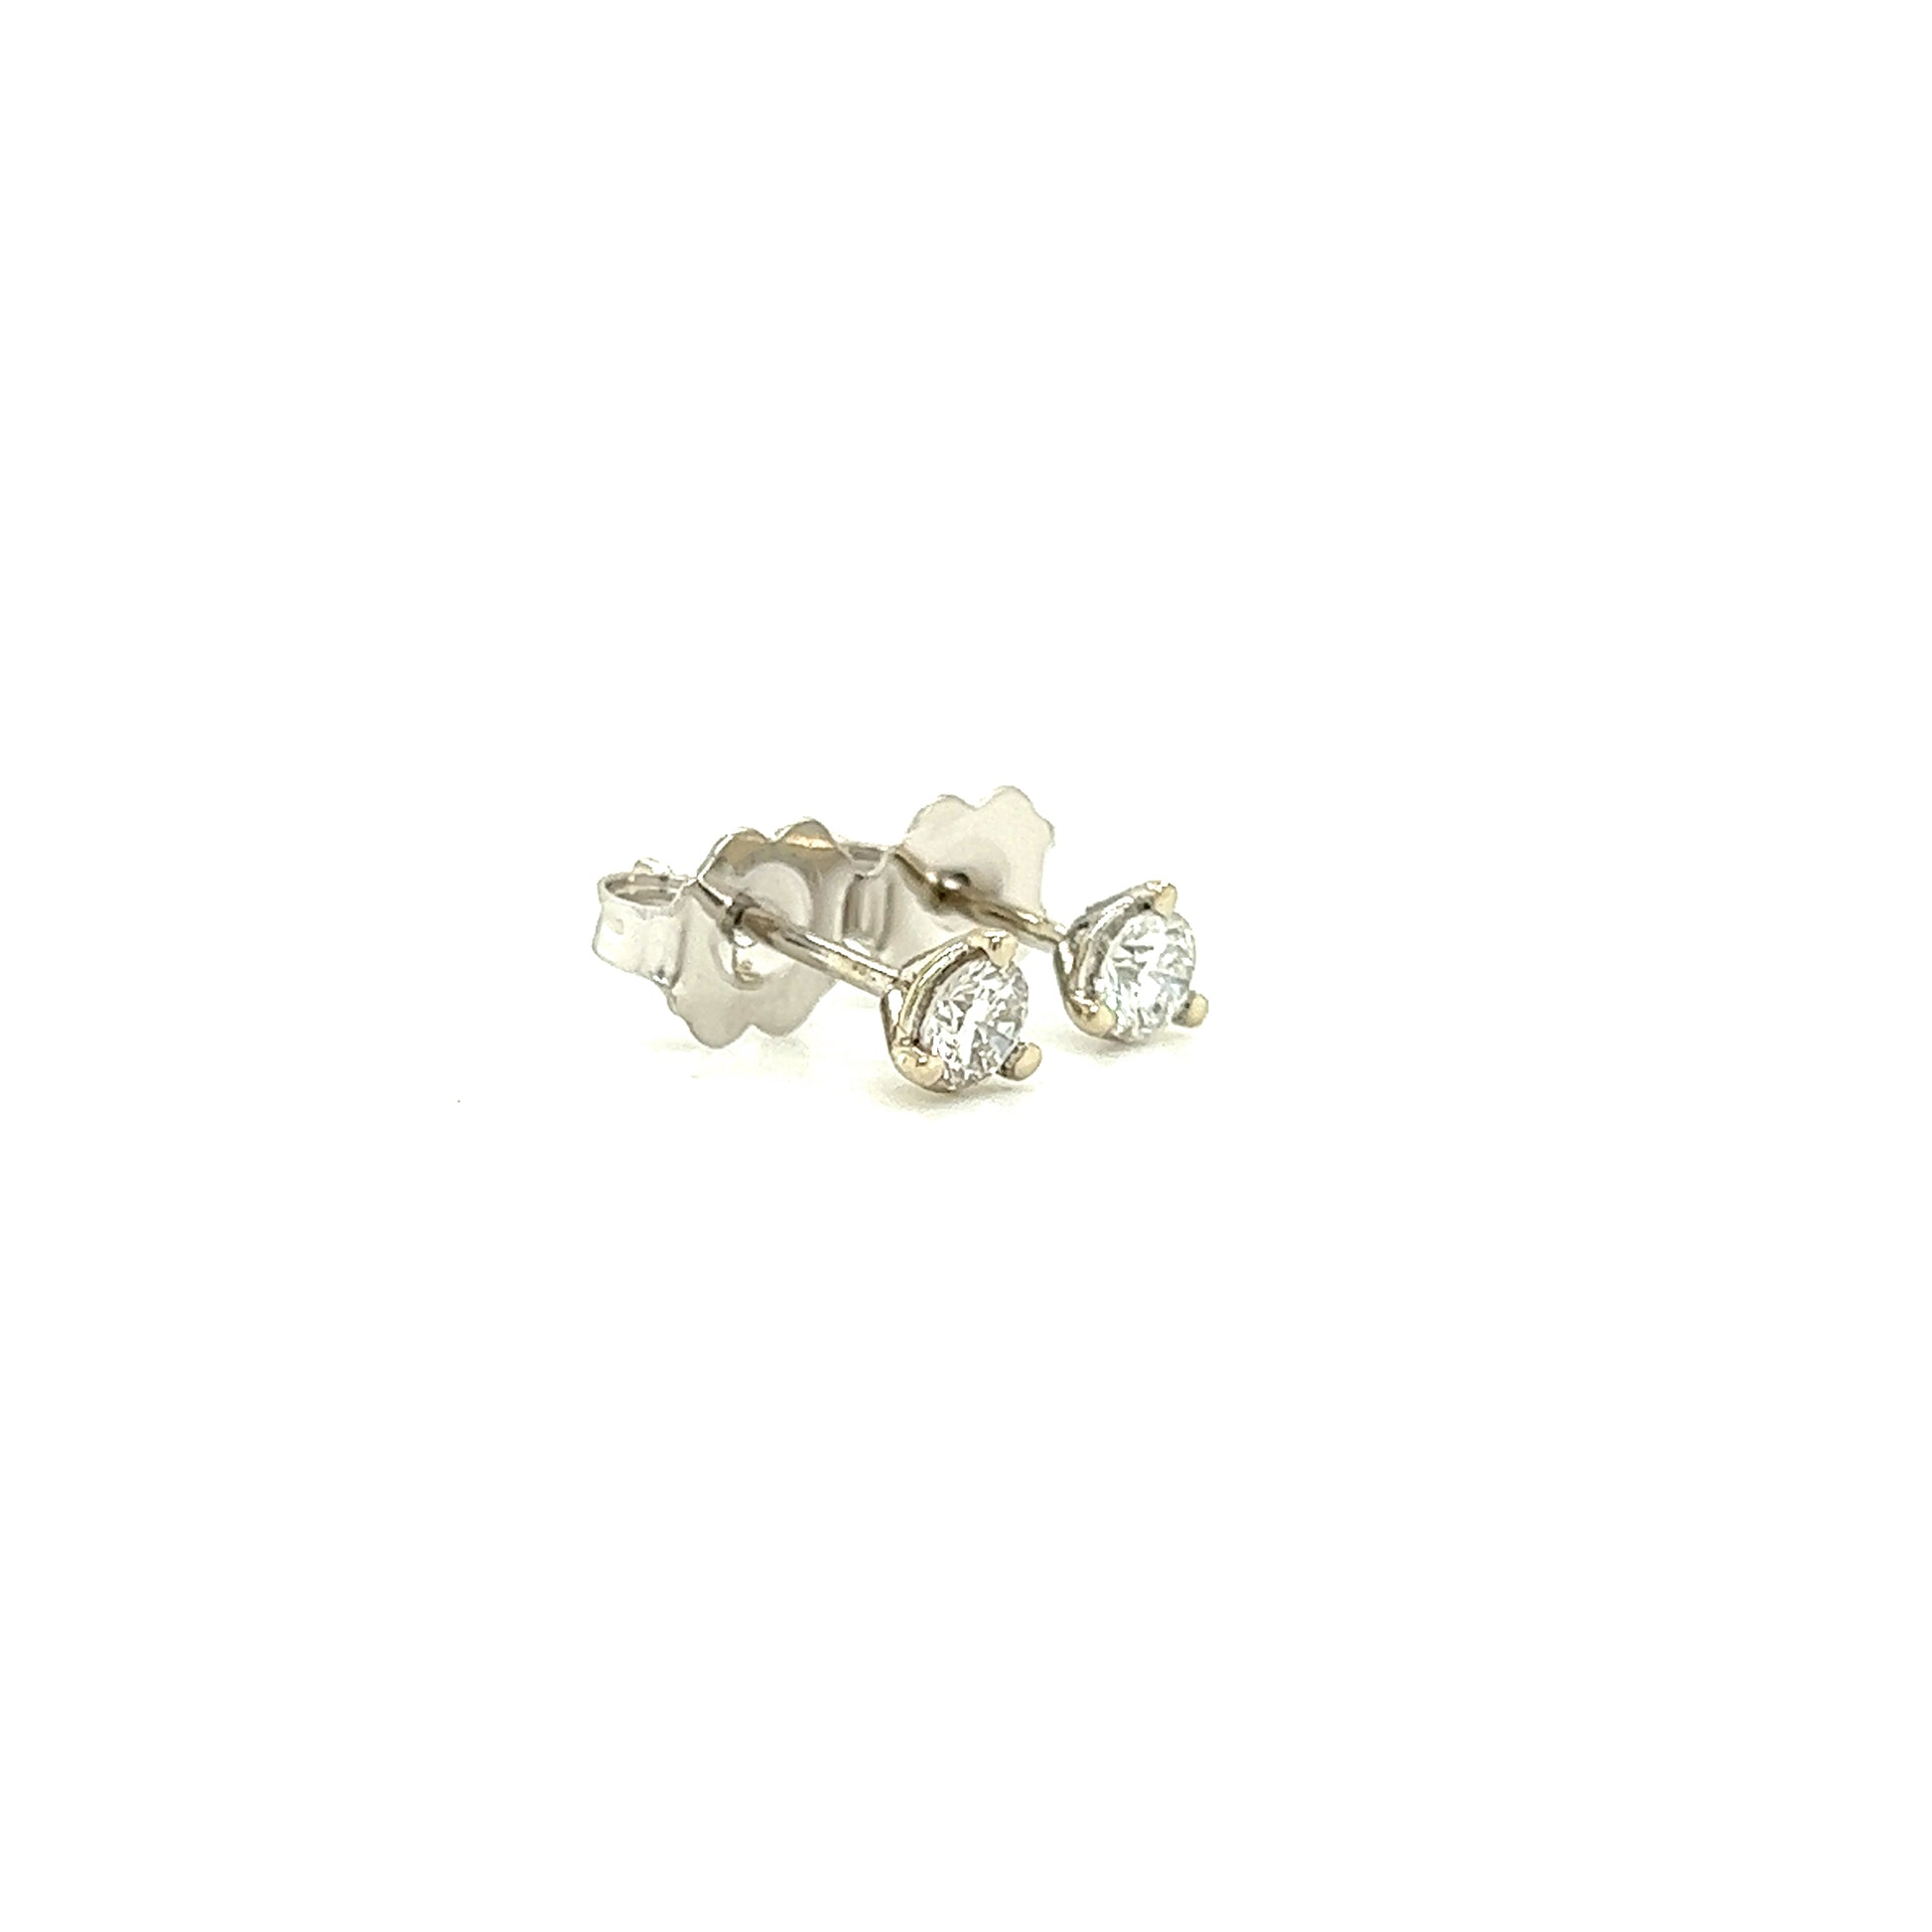 Diamond Stud Earrings with 0.2ctw of Diamonds in 14K White GoldLeft Side View